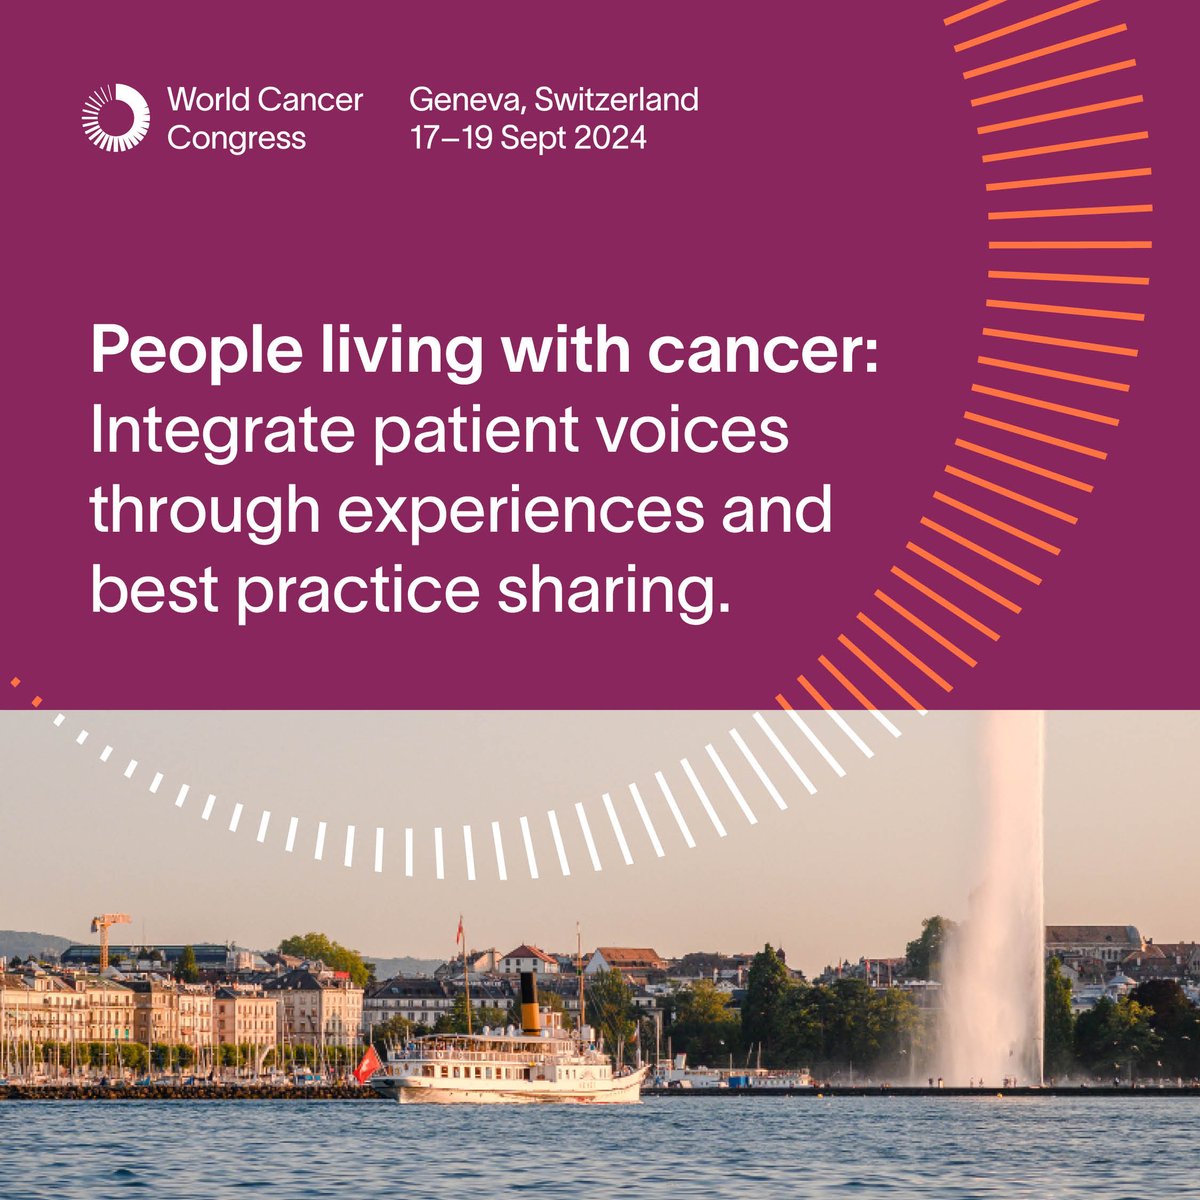 At the #WorldCancerCongress one of our themes is dedicated to patient voices. Through experiences and best practice sharing, we examine the role of patient support programmes. Check out the full #WCC2024 programme:worldcancercongress.org/2024-programme…